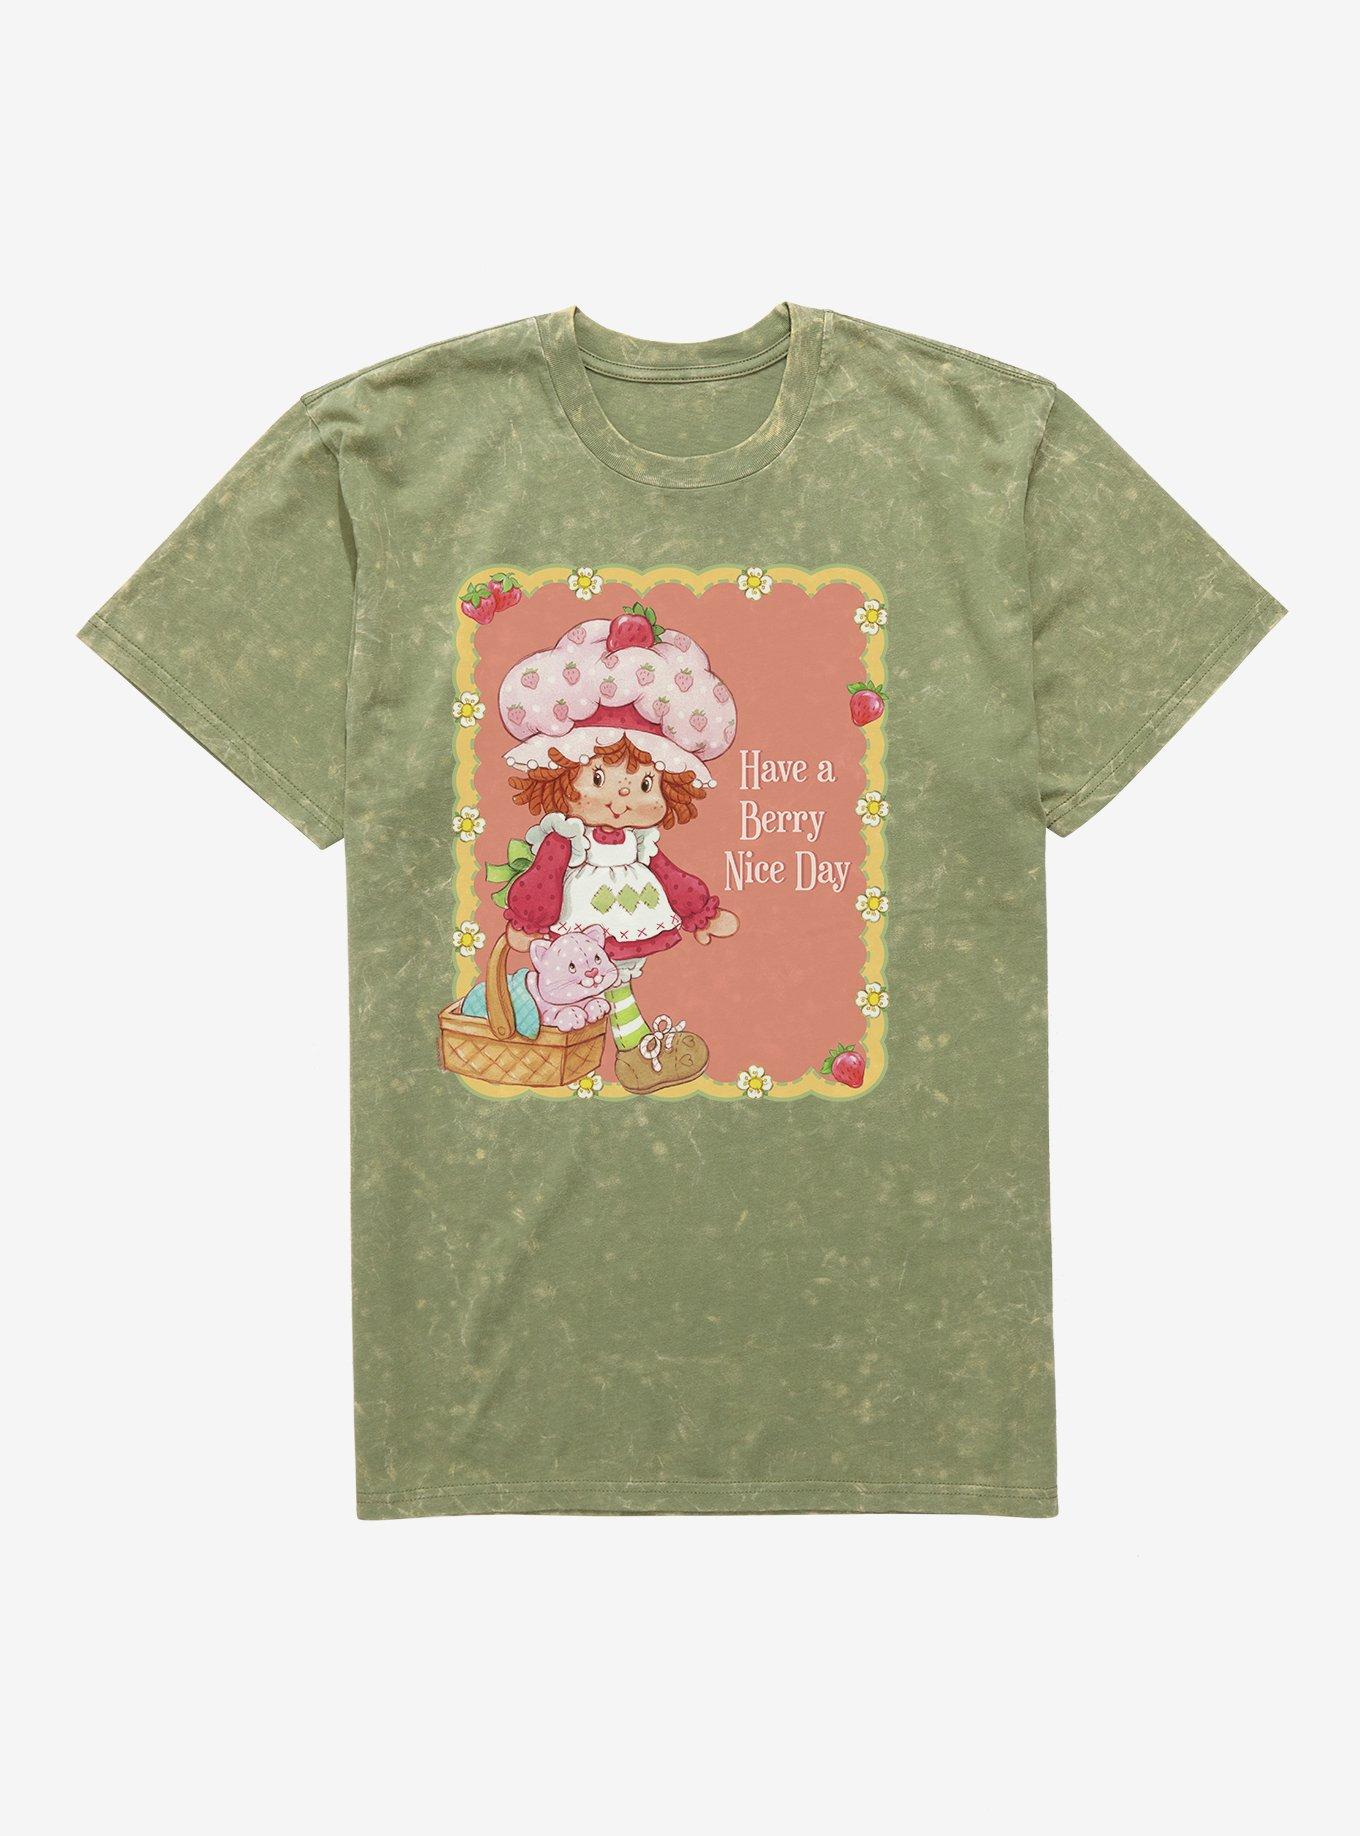 Strawberry Shortcake A Berry Nice Day Mineral Wash T-Shirt, MILITARY GREEN MINERAL WASH, hi-res